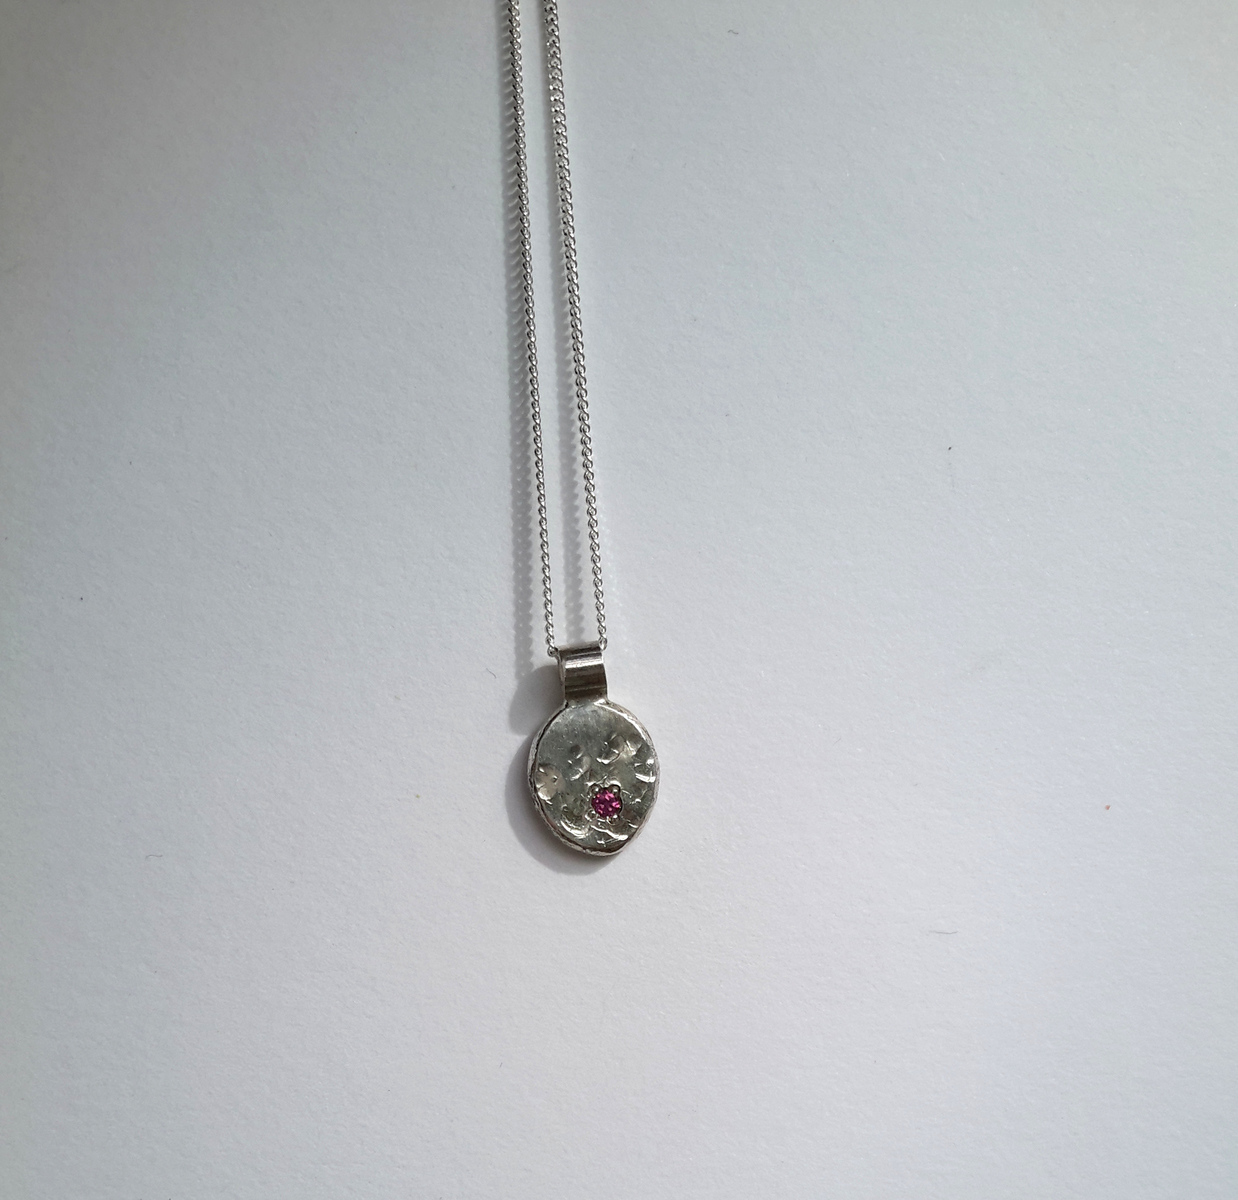 Relic Blossom Impression Necklace with Pink Garnet